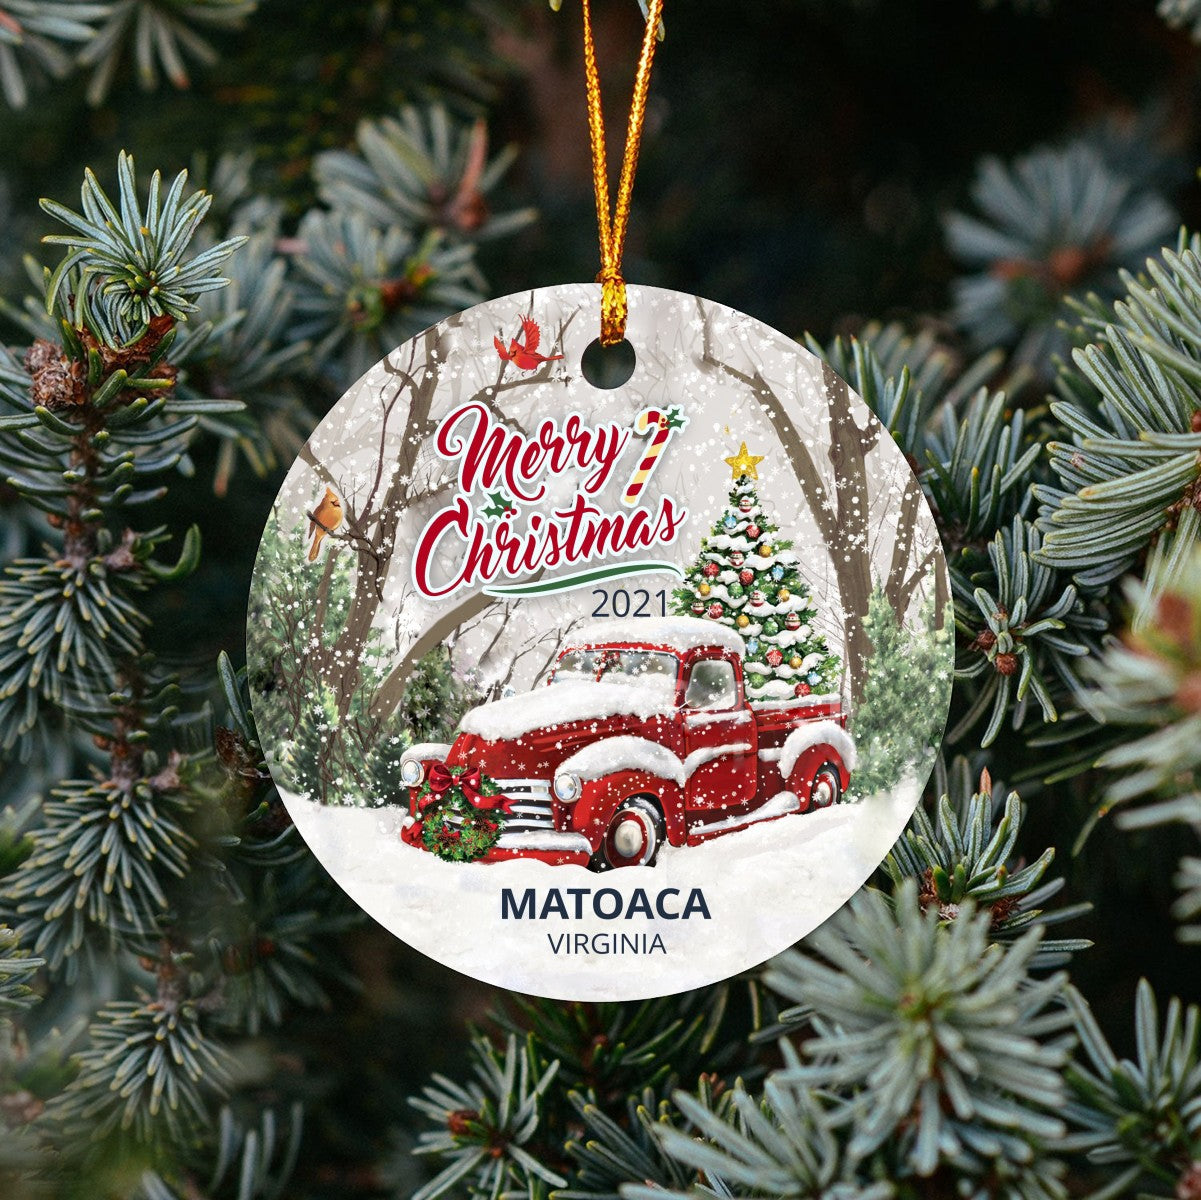 Christmas Tree Ornaments Matoaca - Ornament With Name City, State Matoaca Virginia VA Ornament - Red Truck Xmas Ornaments 3'' Plastic Gift For Family, Friend And Housewarming